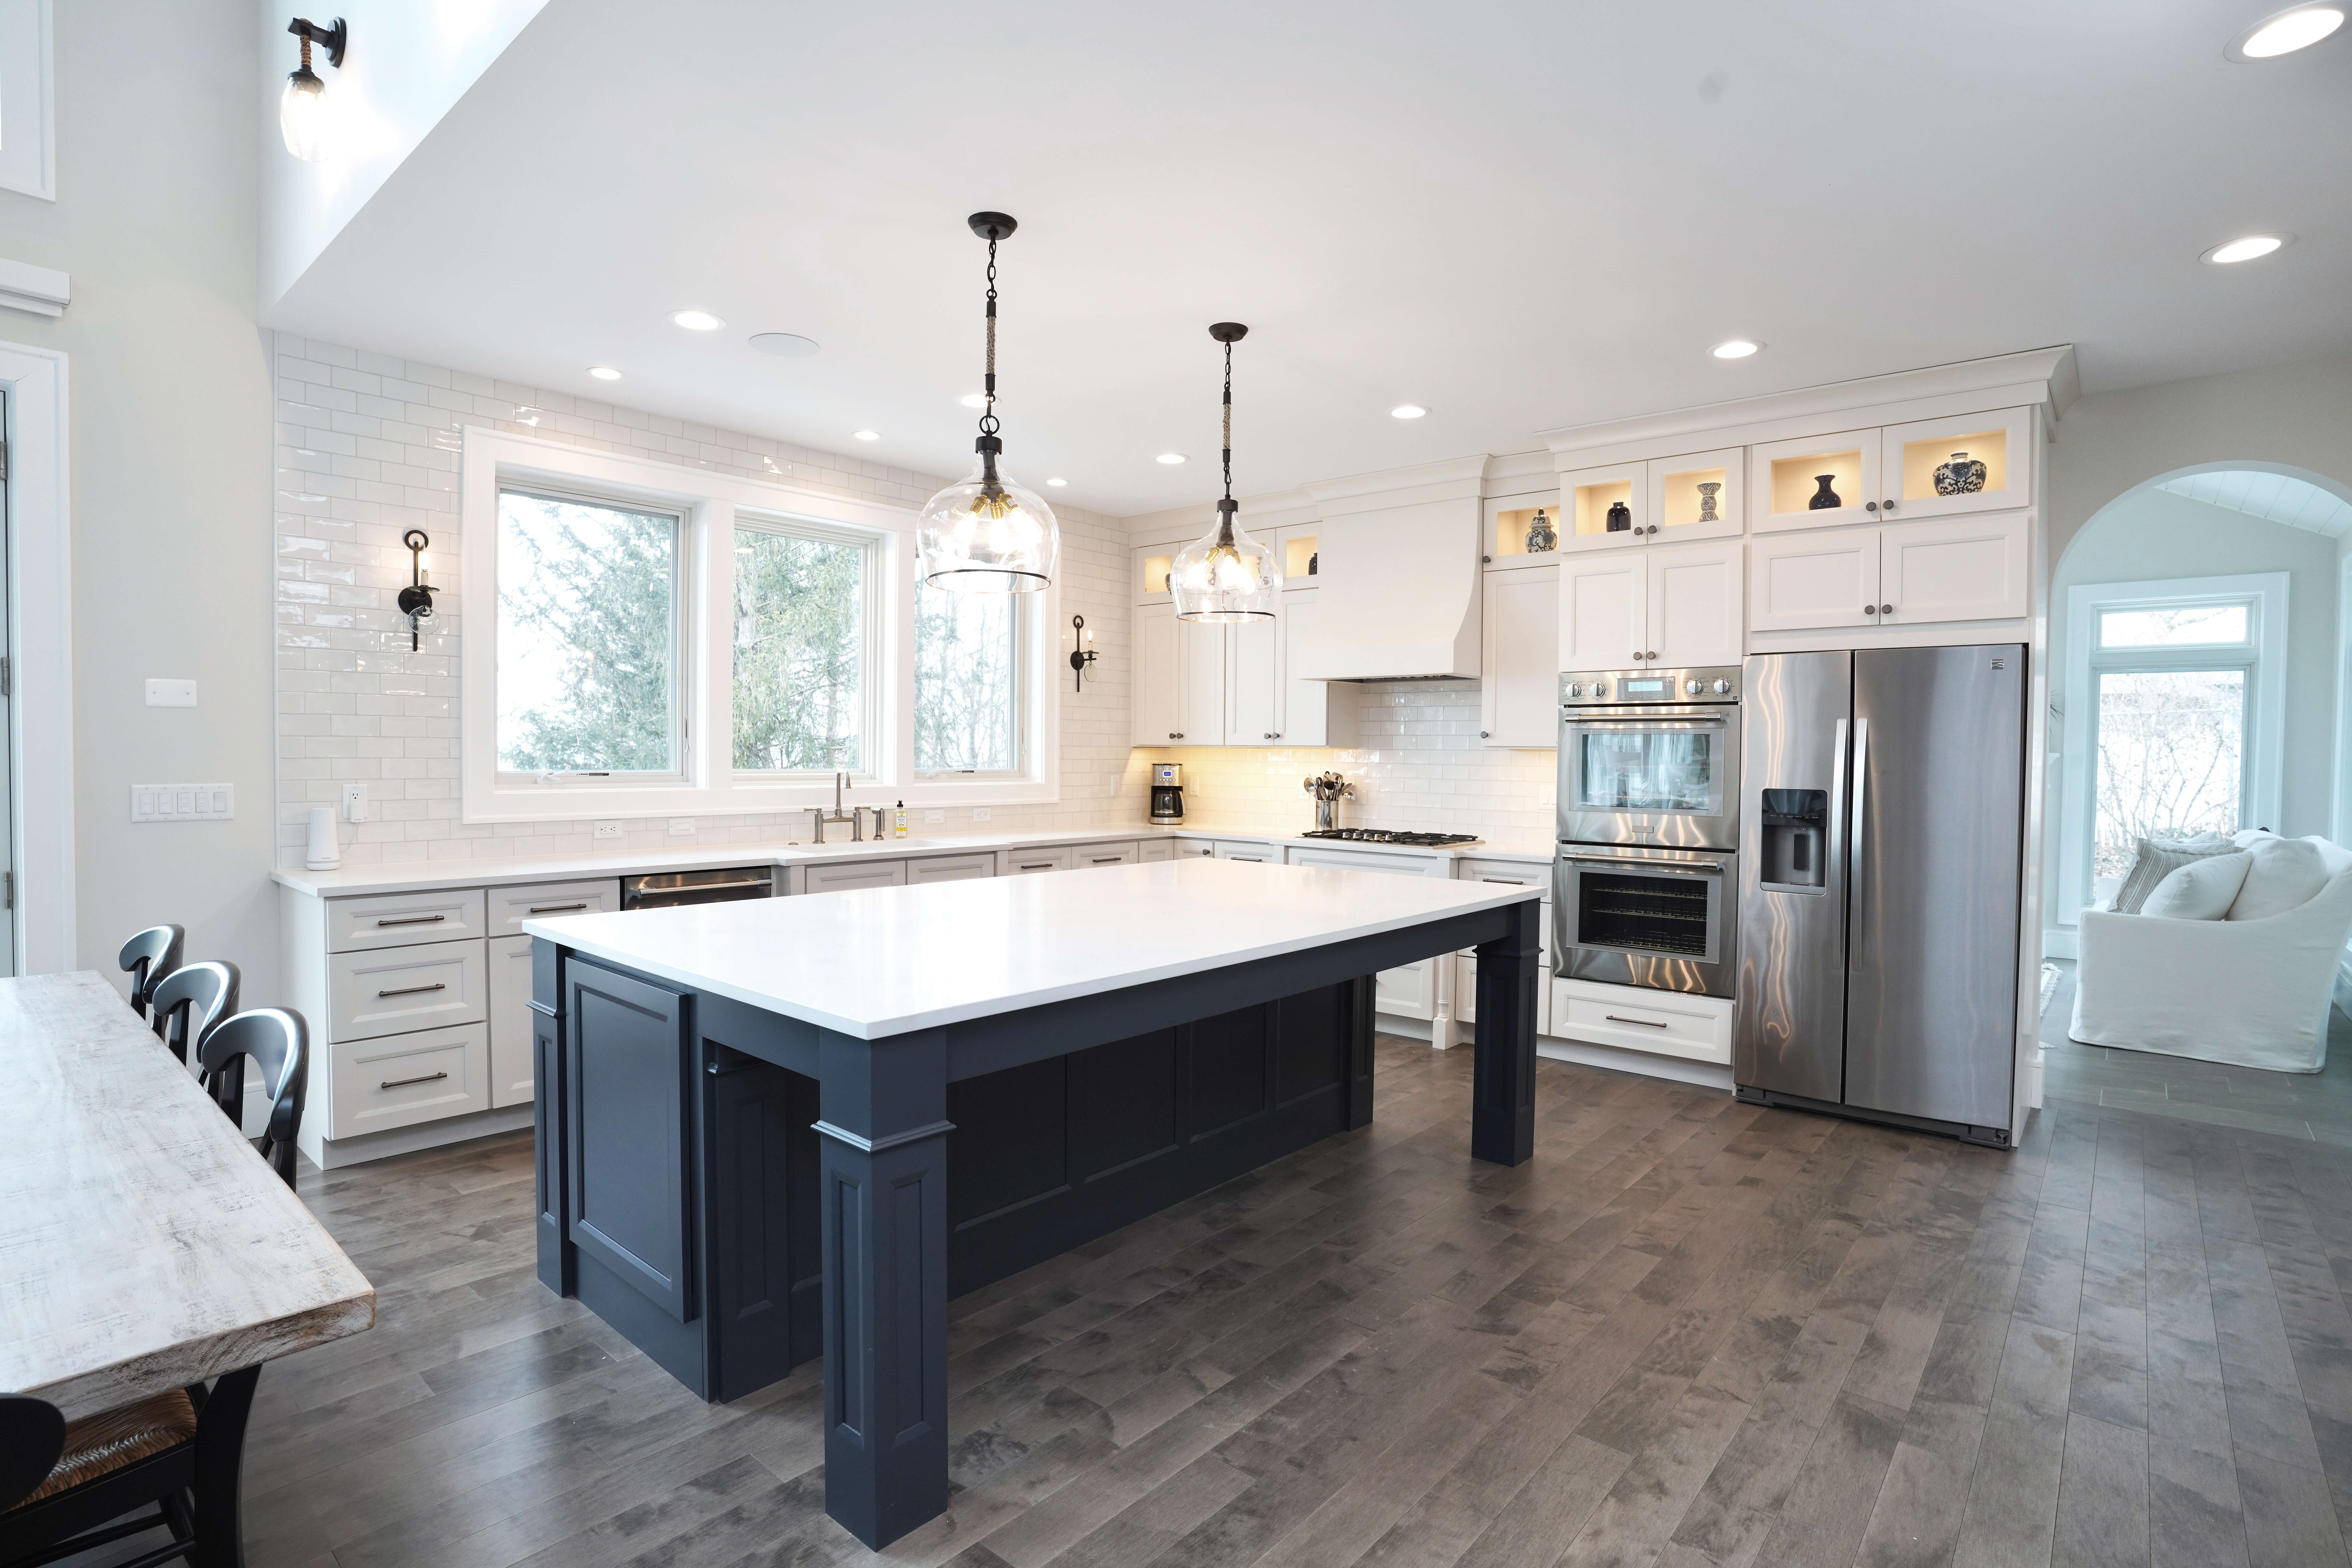 A smooth, dark navy blue painted kitchen island with column legs is the focal point in this open concept kitchen design with a perimeter full of white painted cabinetry.